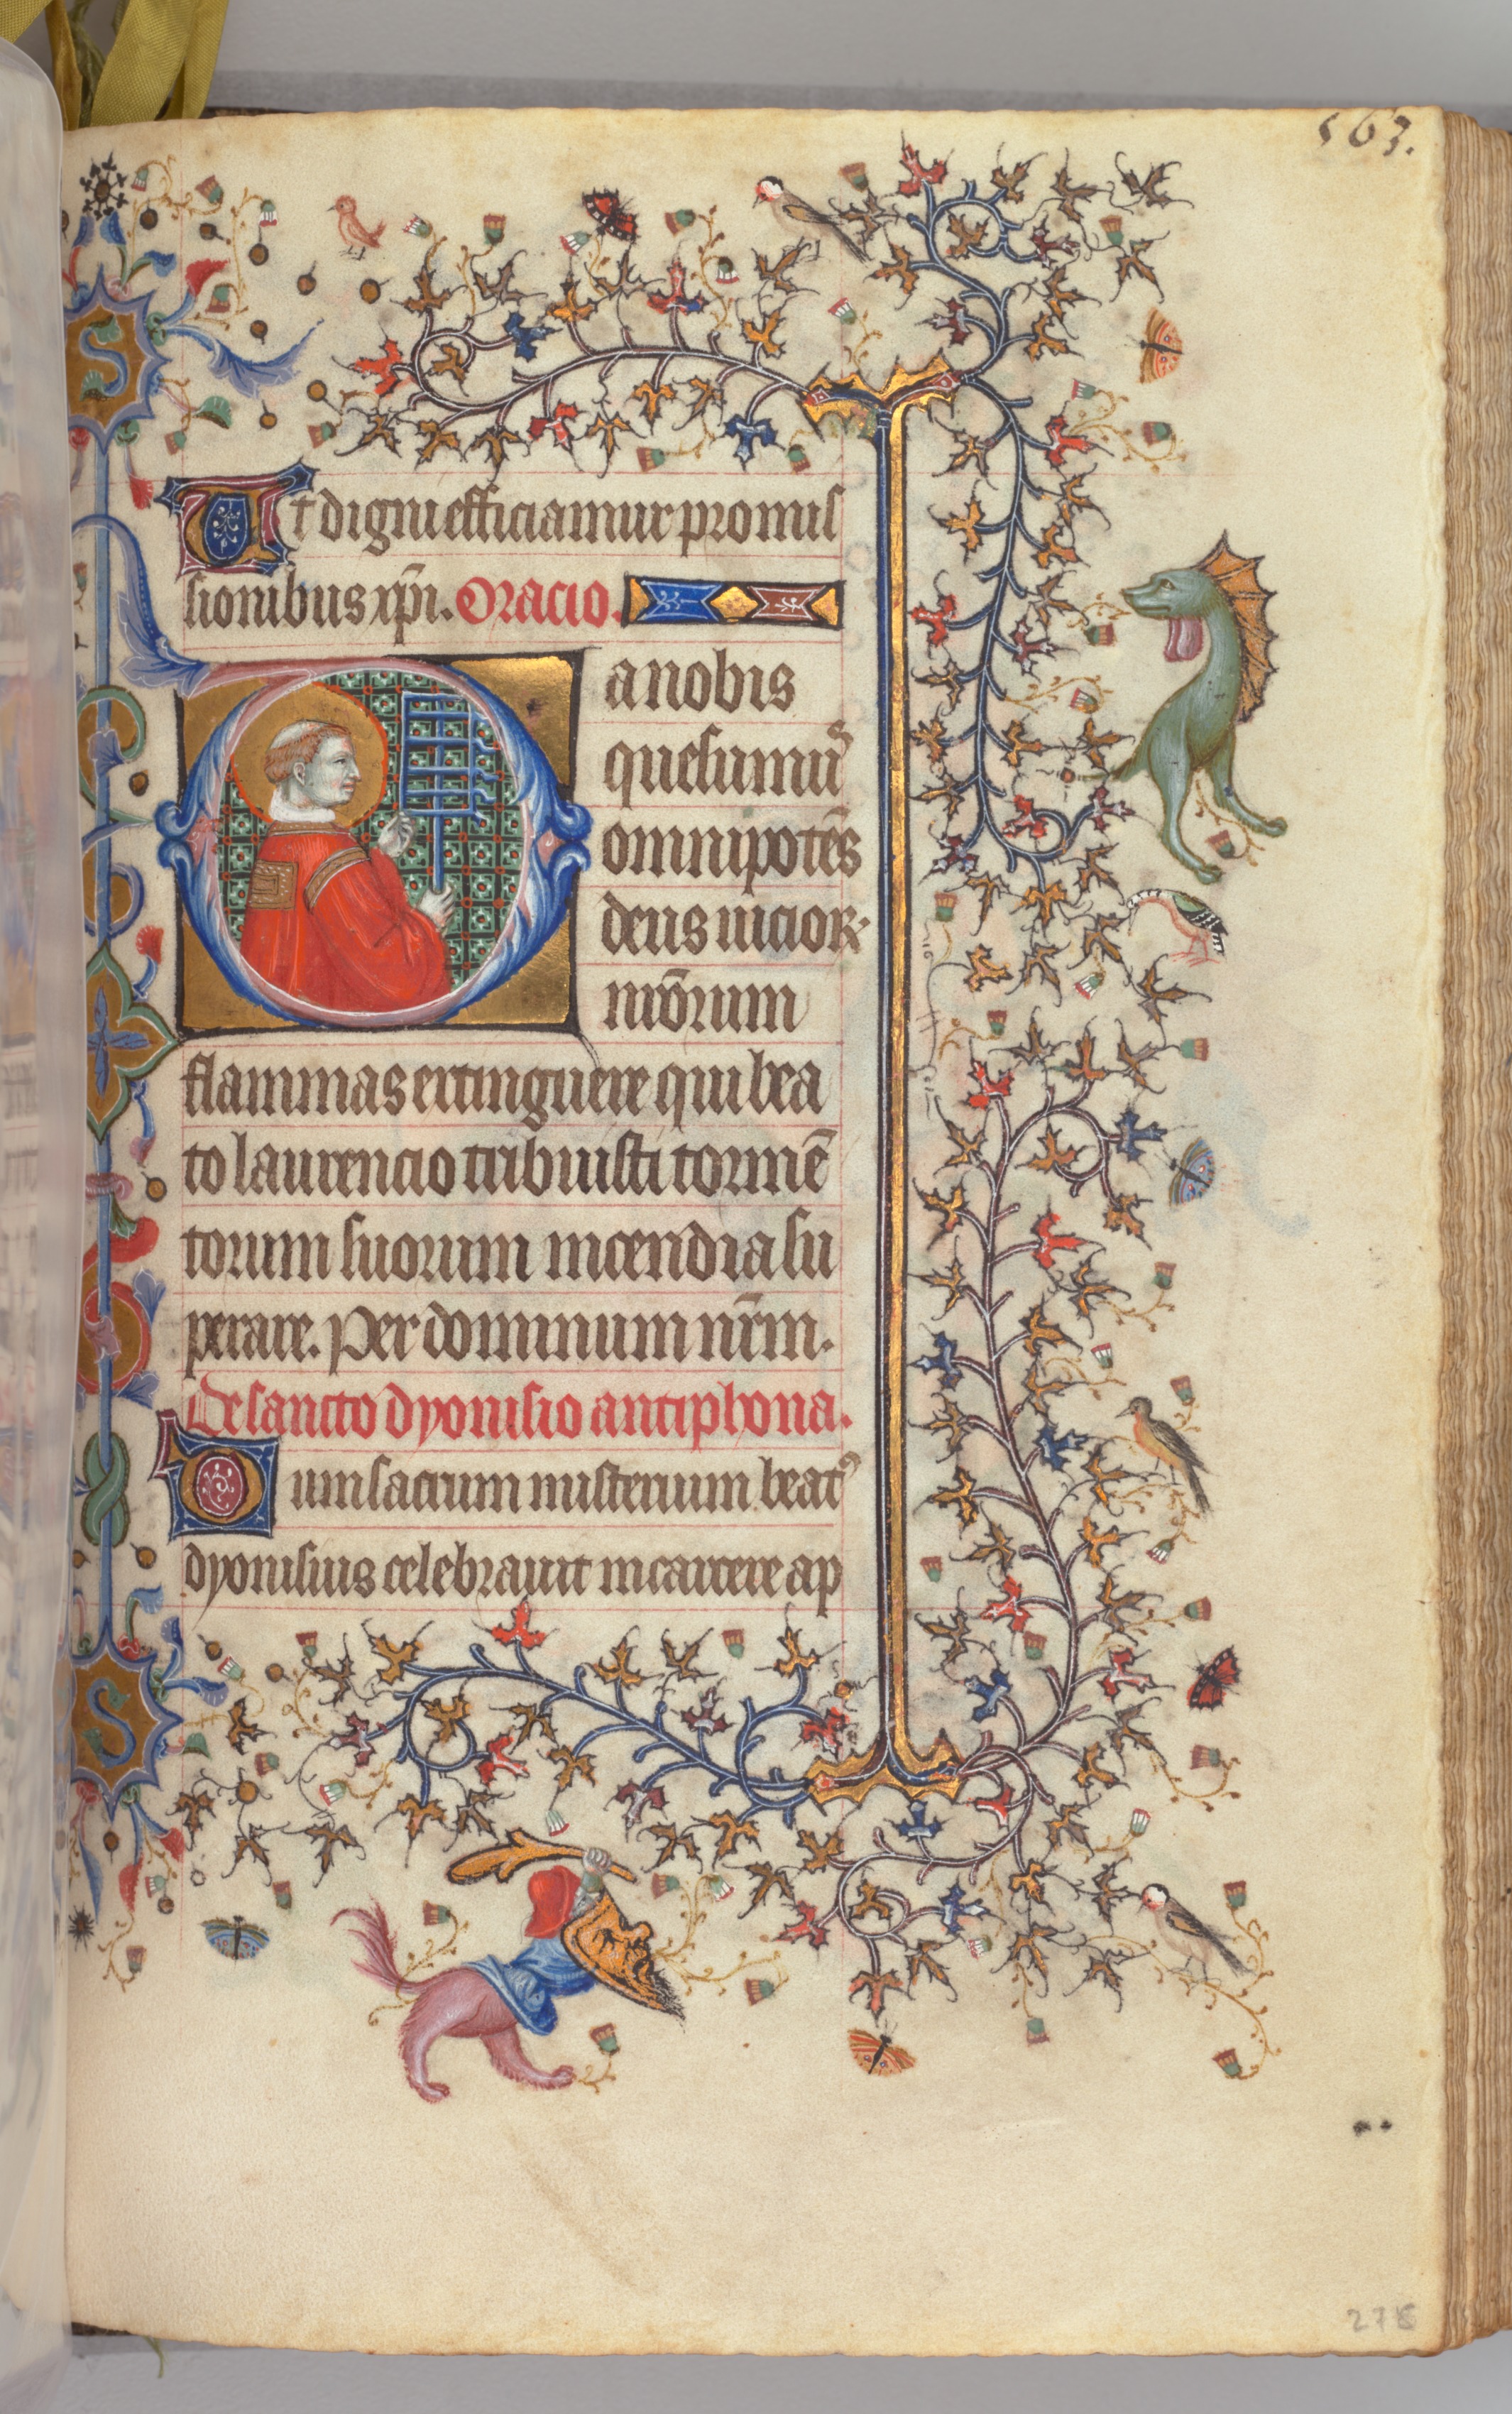 Hours of Charles the Noble, King of Navarre (1361-1425): fol. 276r, St. Lawrence